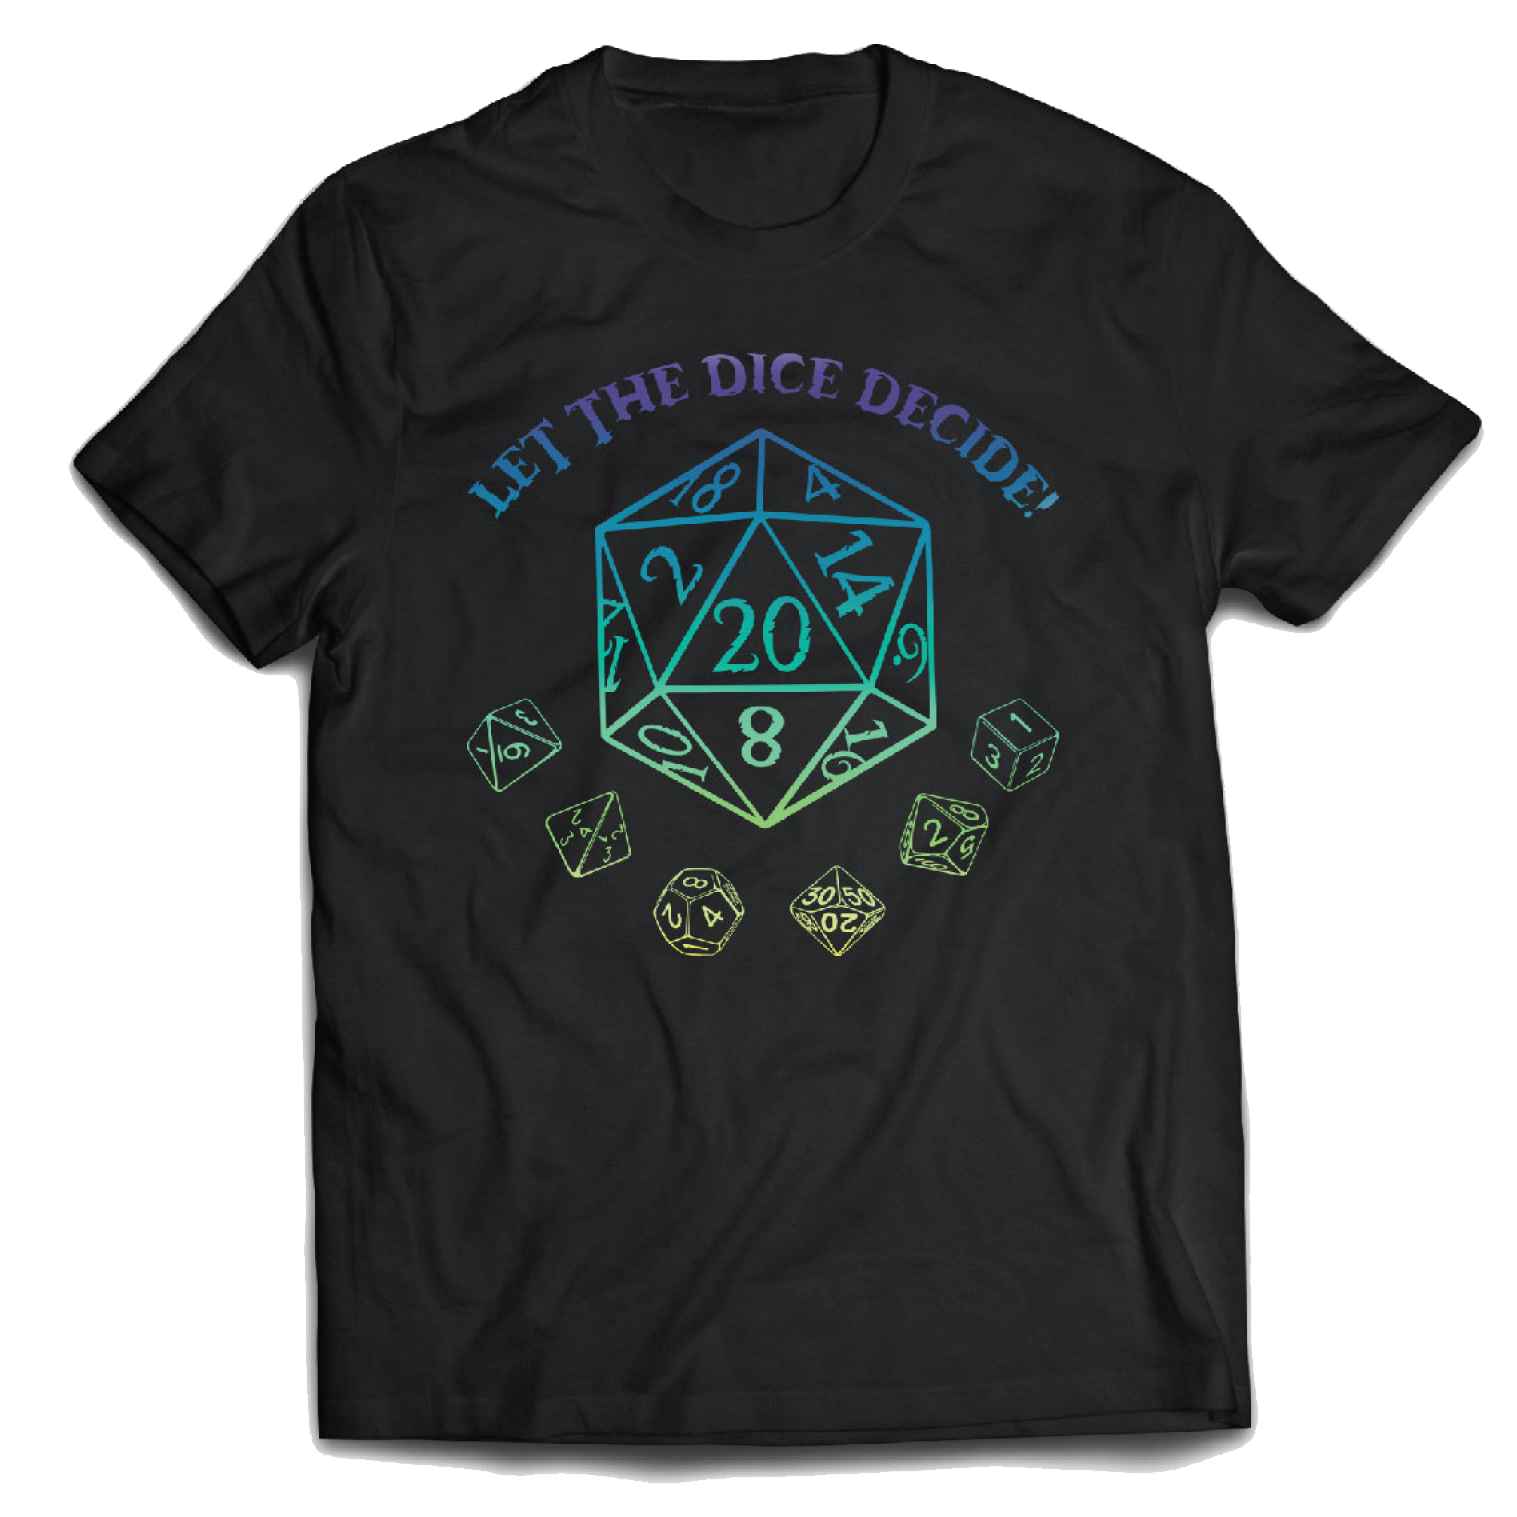 Black D&D T-Shirt featuring a large d20 and small polyhedral dice with font saying